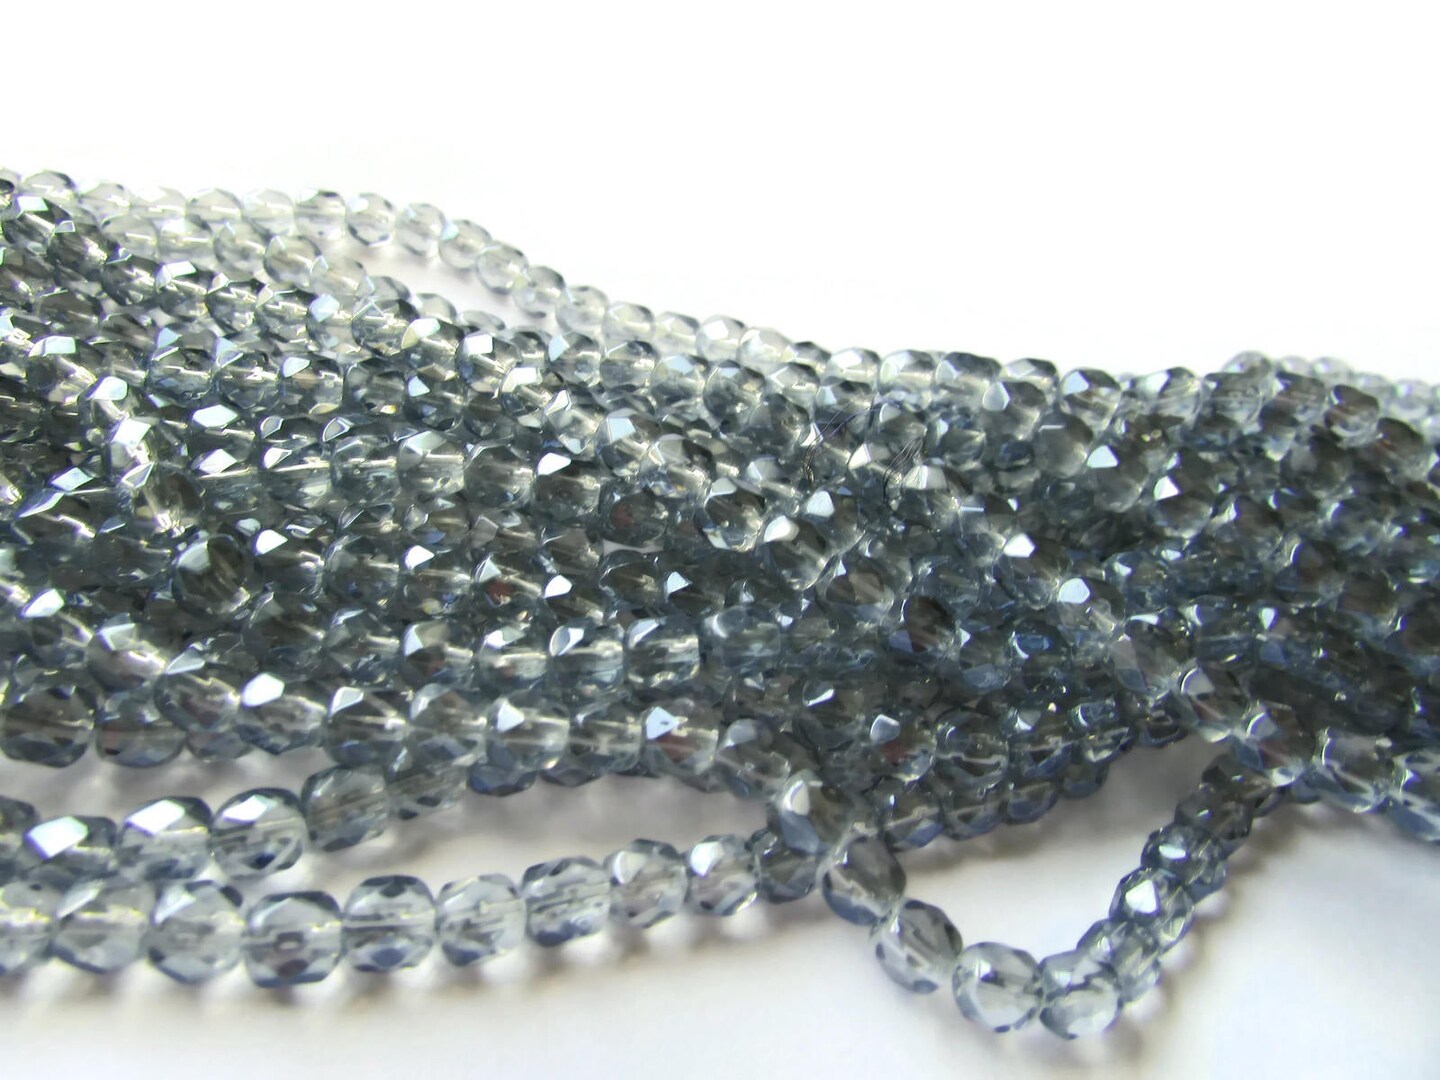 30 10mm Clear Crystal Faceted Round Beads Crystal Glass Beads Full Strand by Smileyboy | Michaels